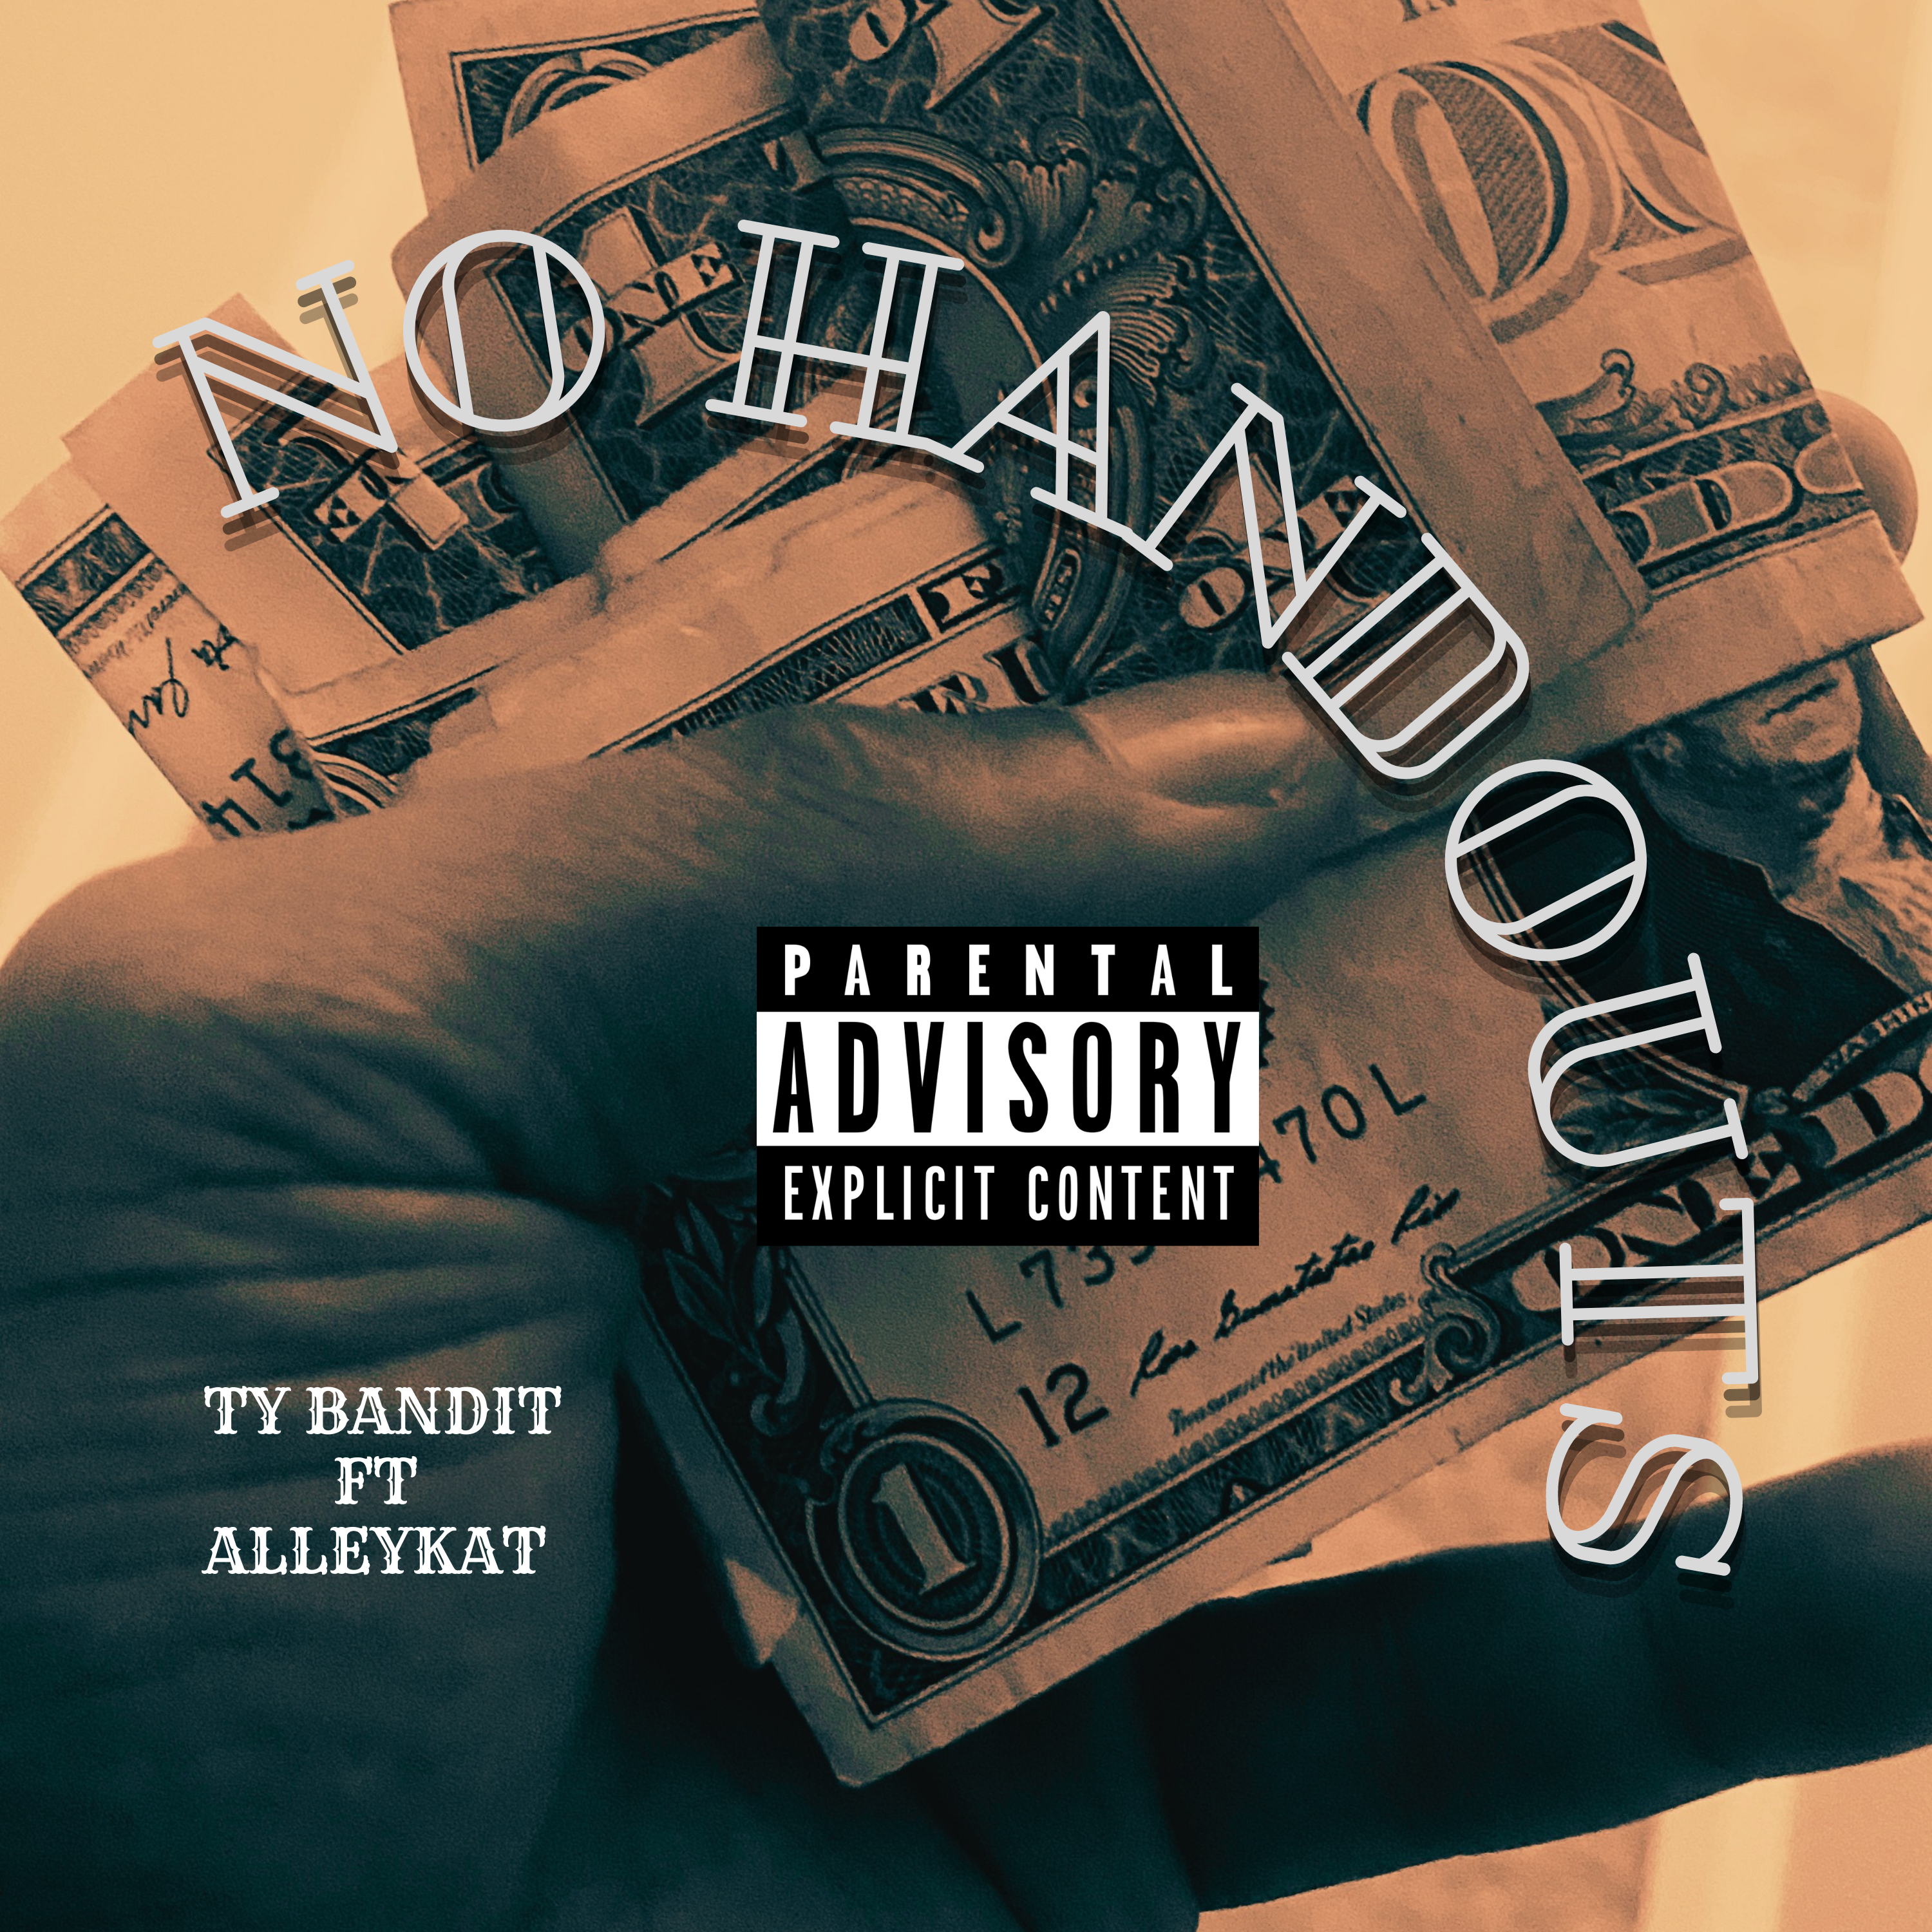 Art for No hand outs by ALLEYKAT NUMONEY FT TY BANDIT